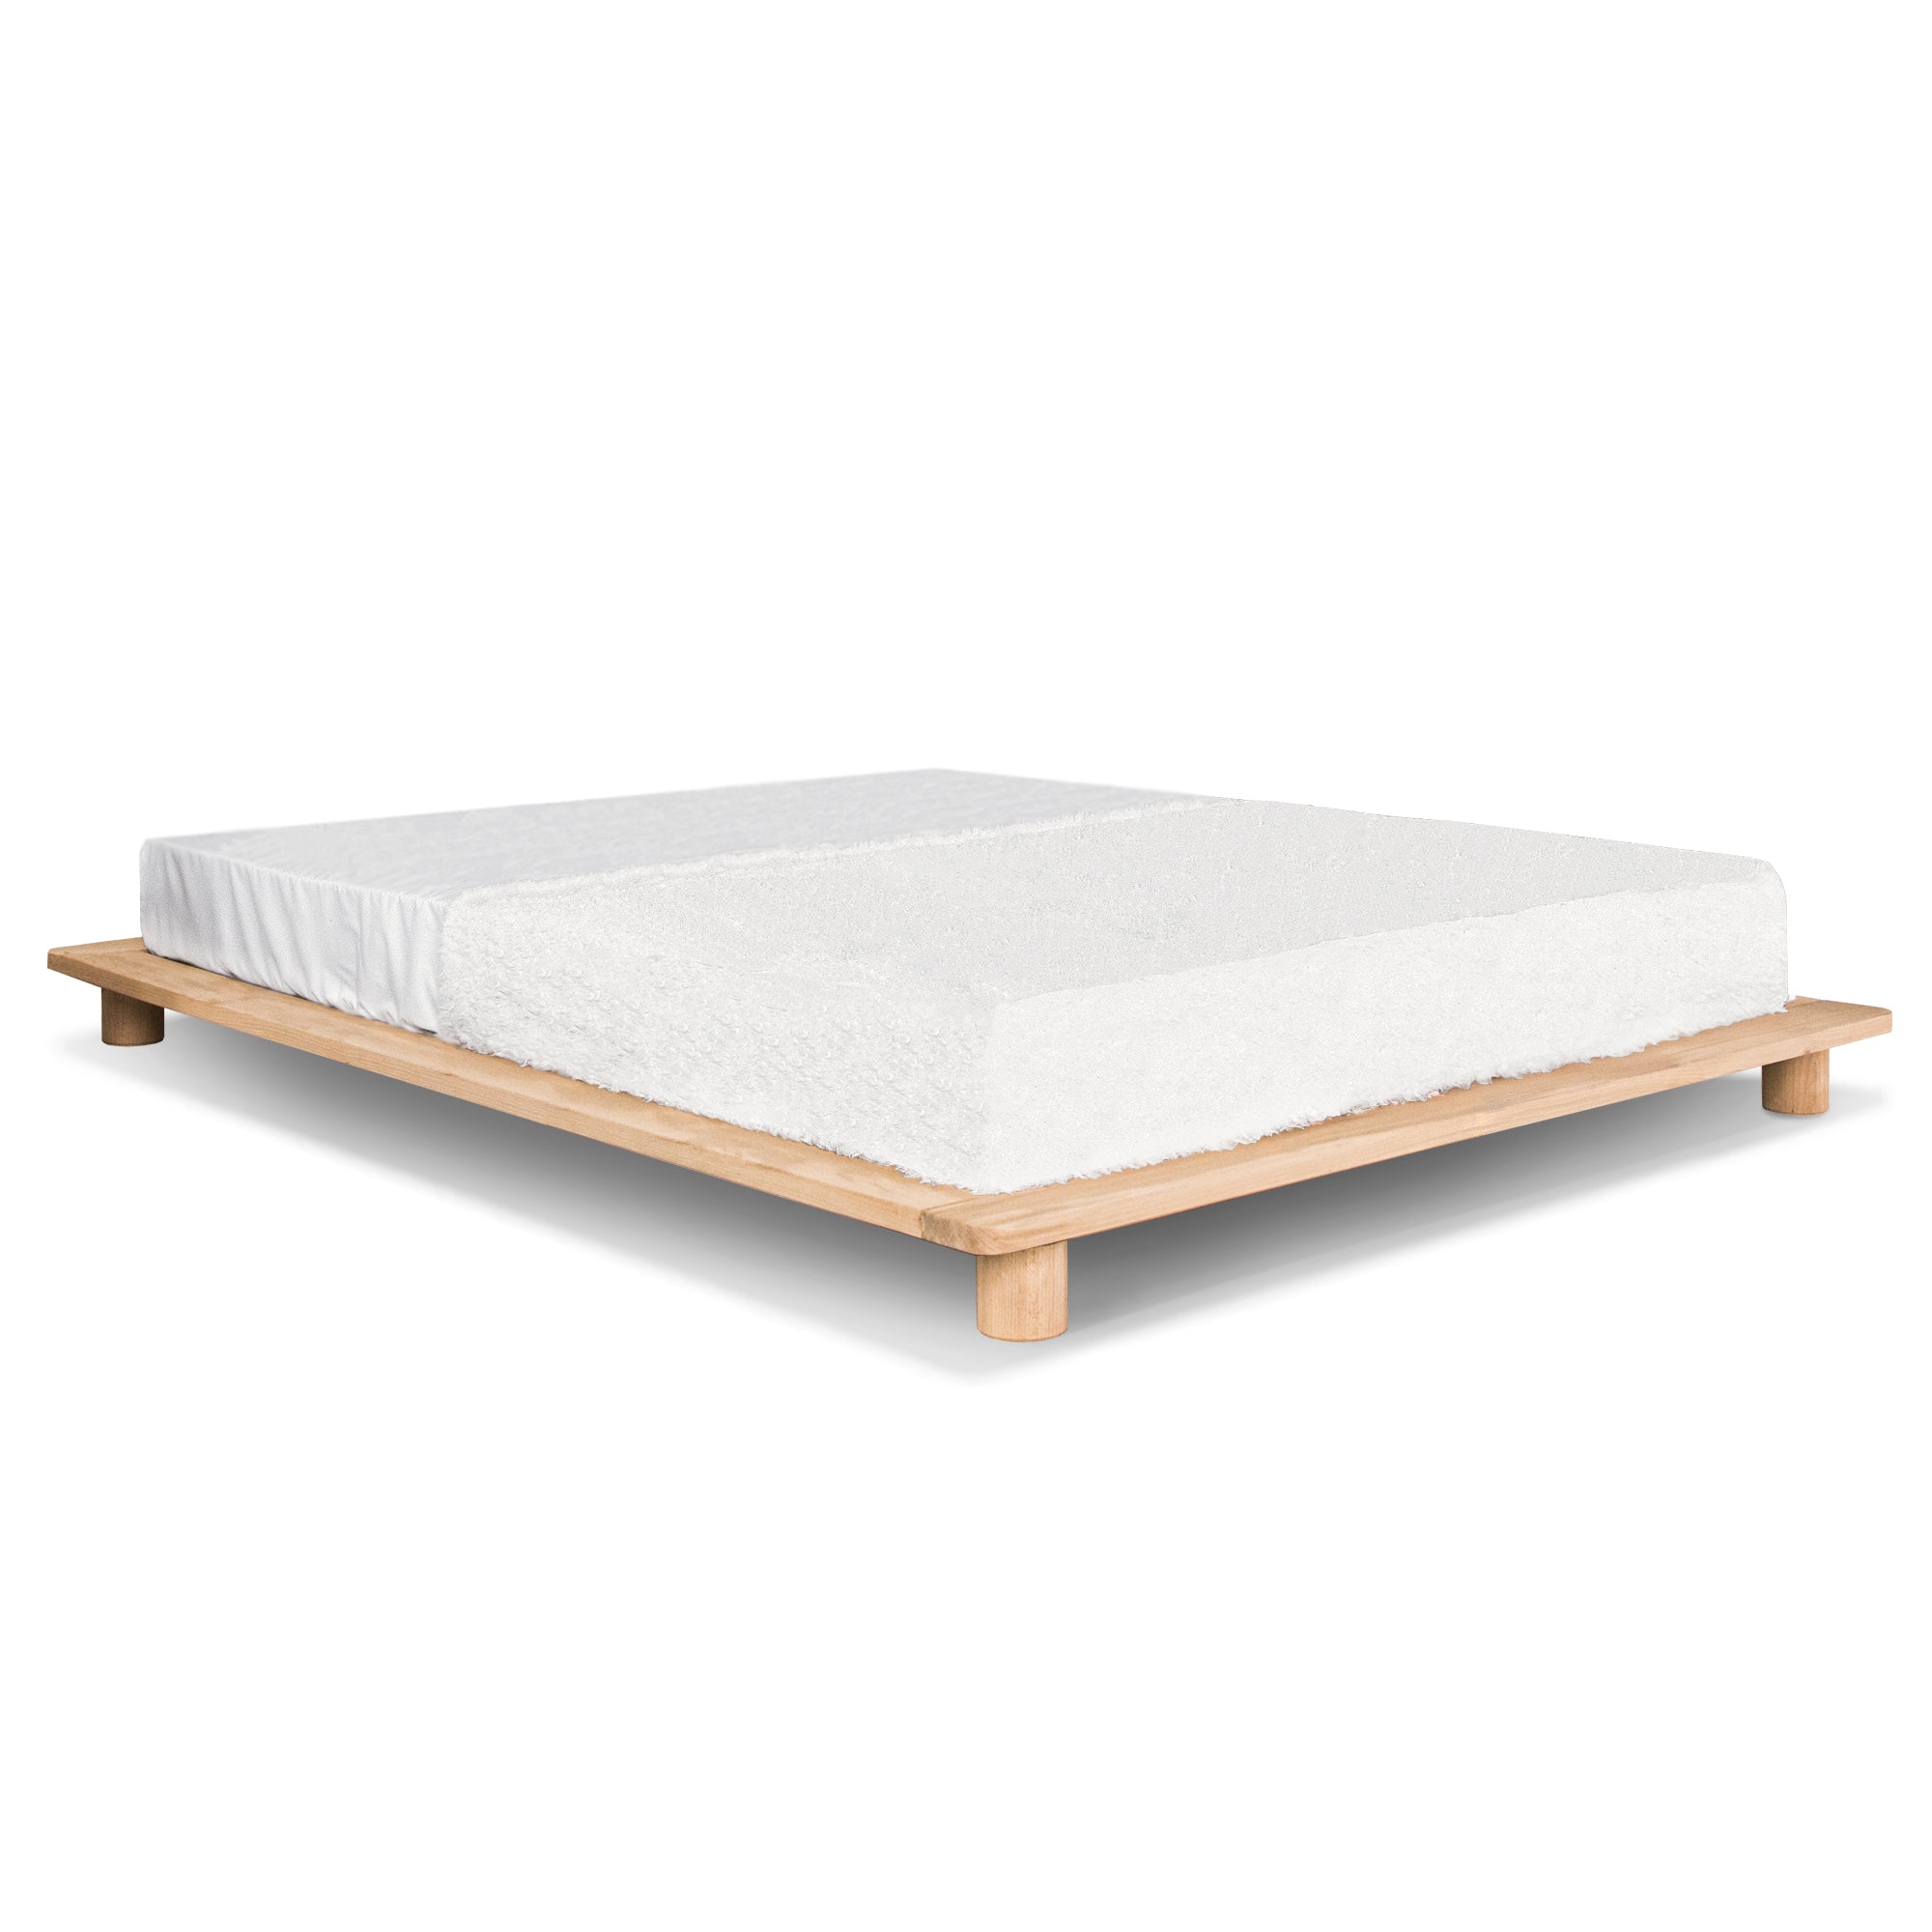 CONE Double Bed, Beech Wood natural colour